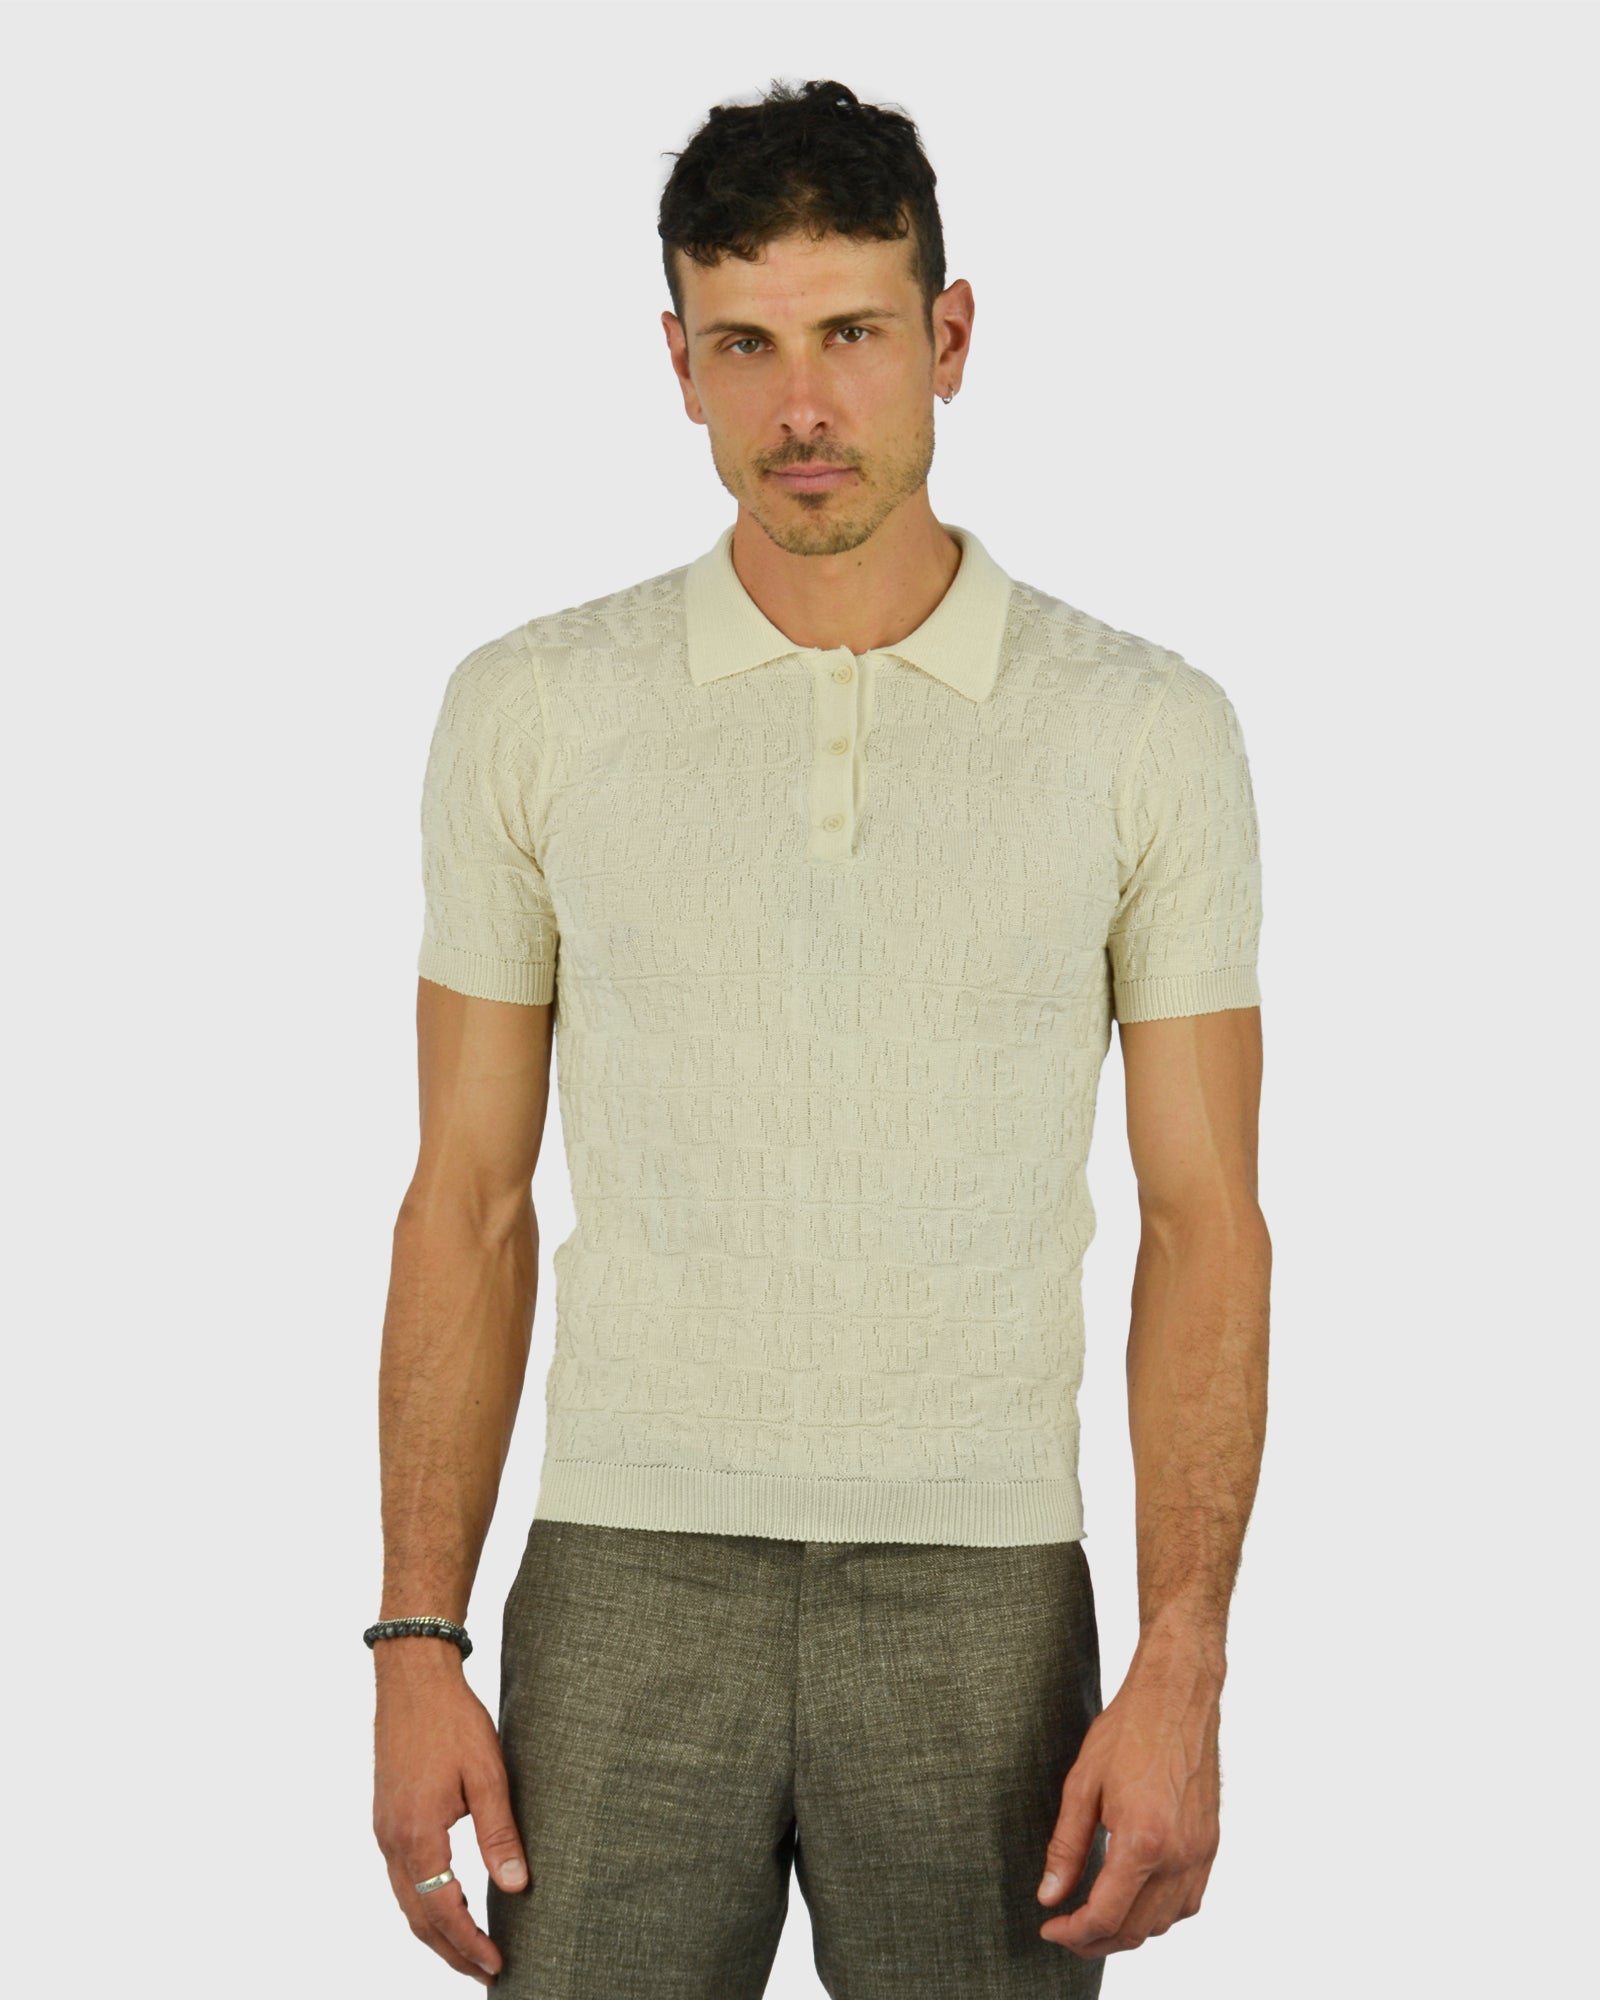 VINCENT & FRANKS S221VF CREAM SS KNITED POLO